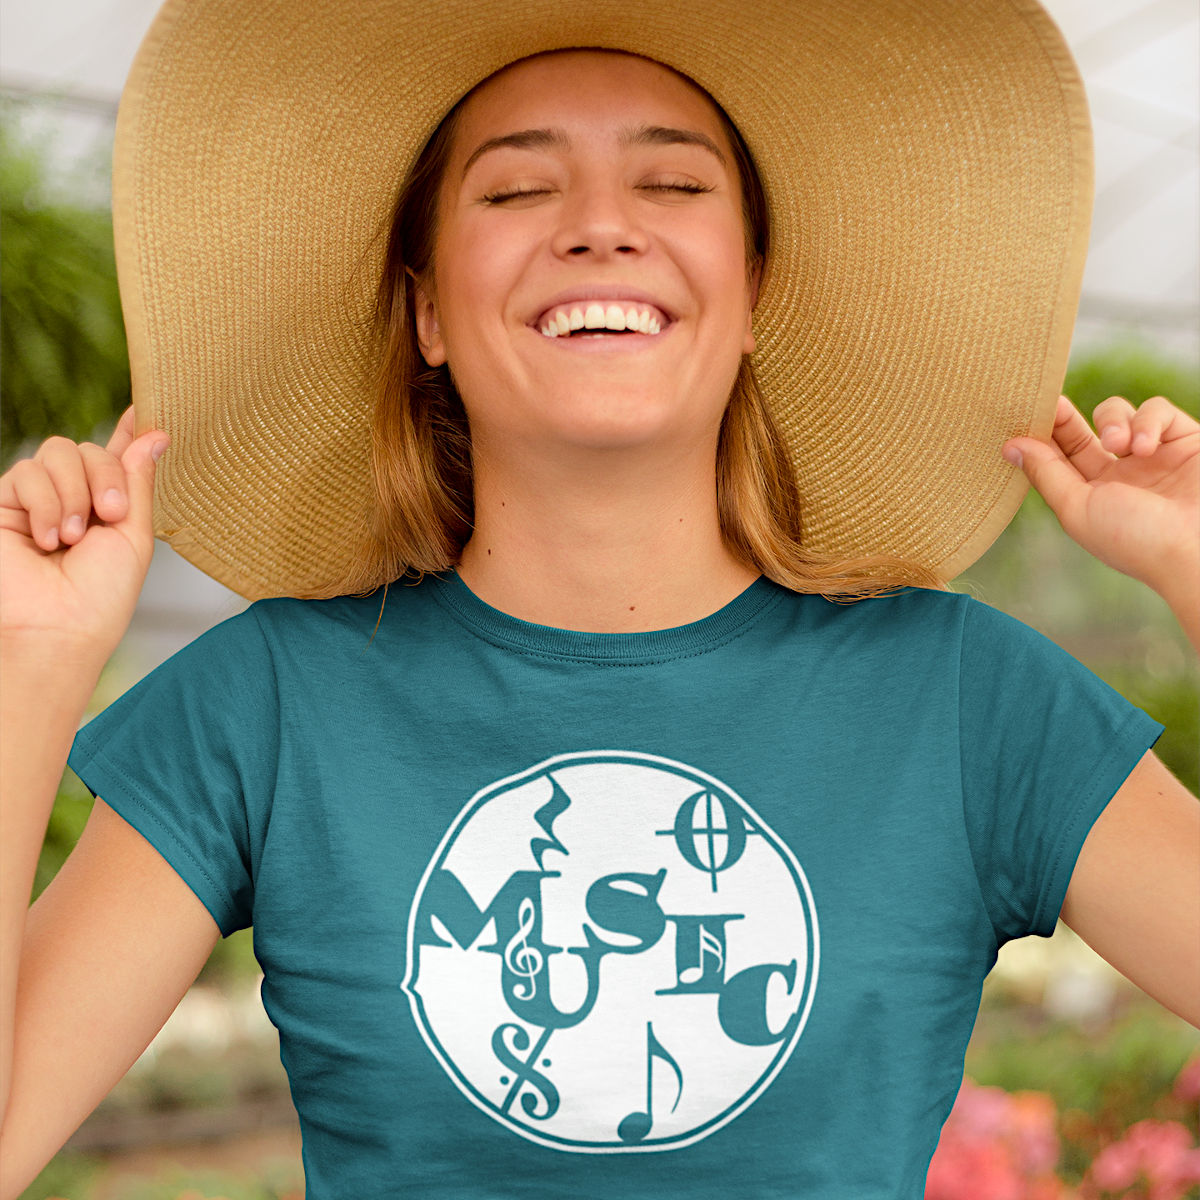 Woman in a straw hat and music-themed t-shirt